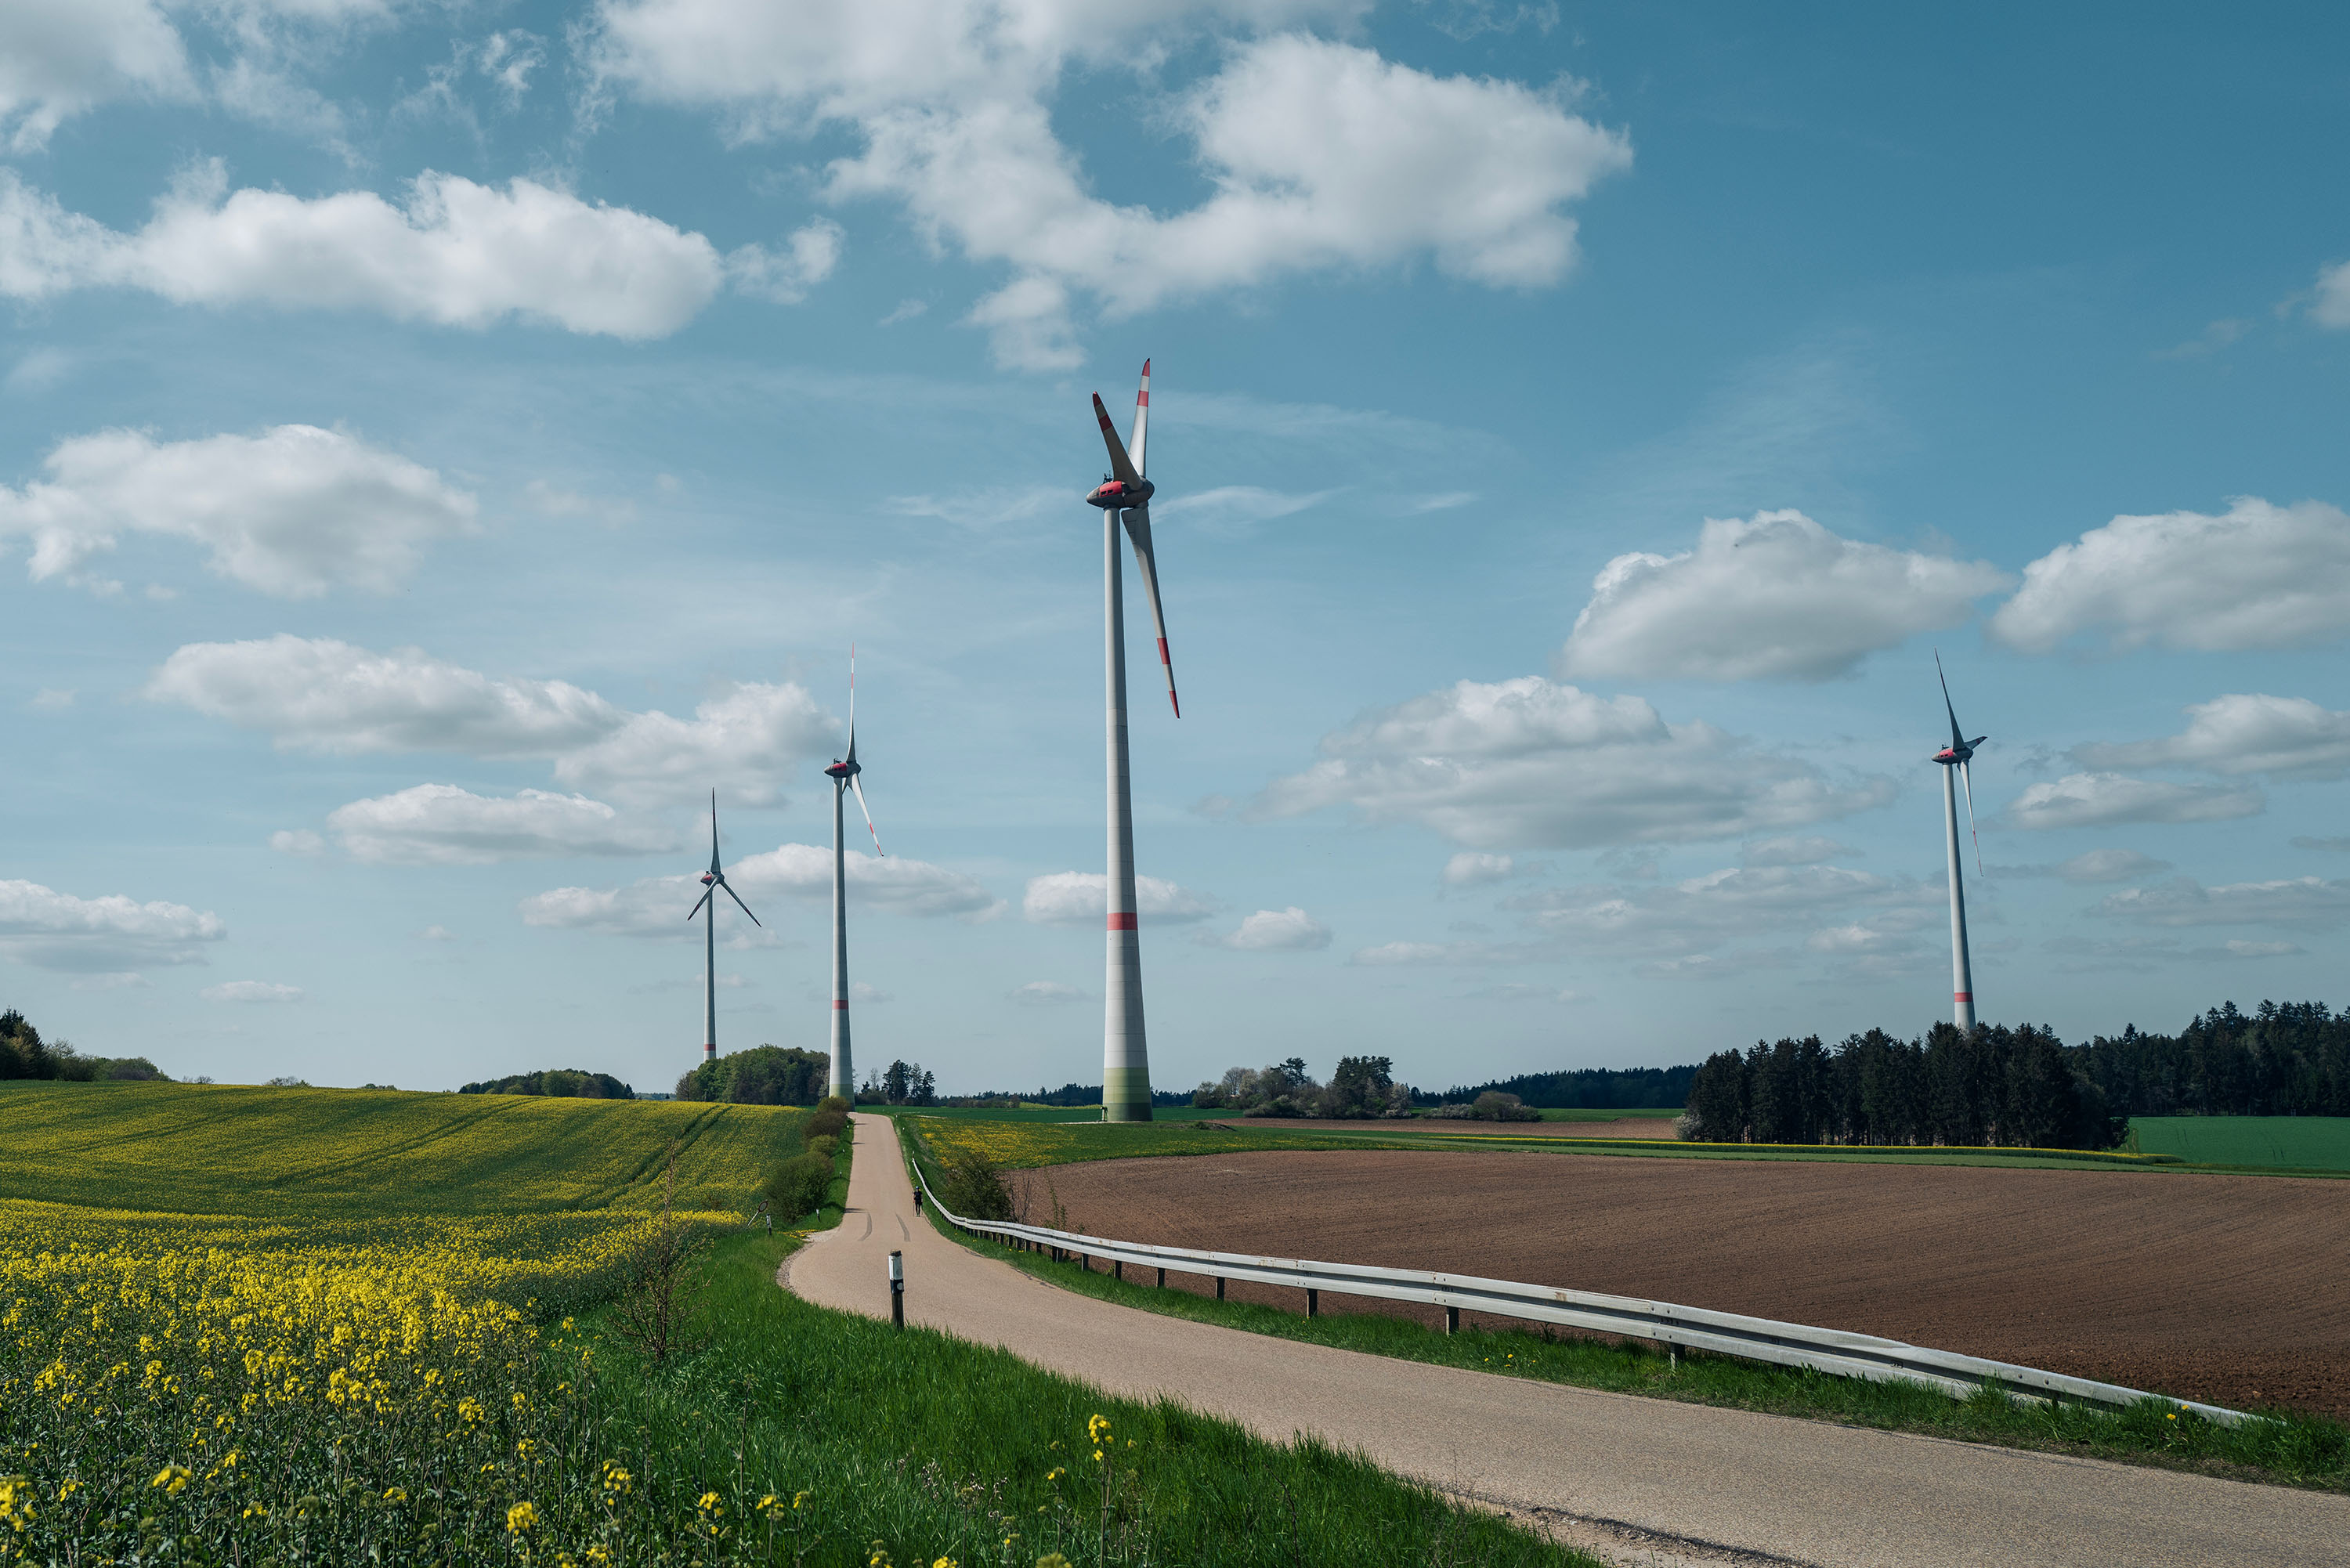 A rural area with four wind turbines standing tall on a green field next to a country road. The partly cloudy sky adds depth to the scene.